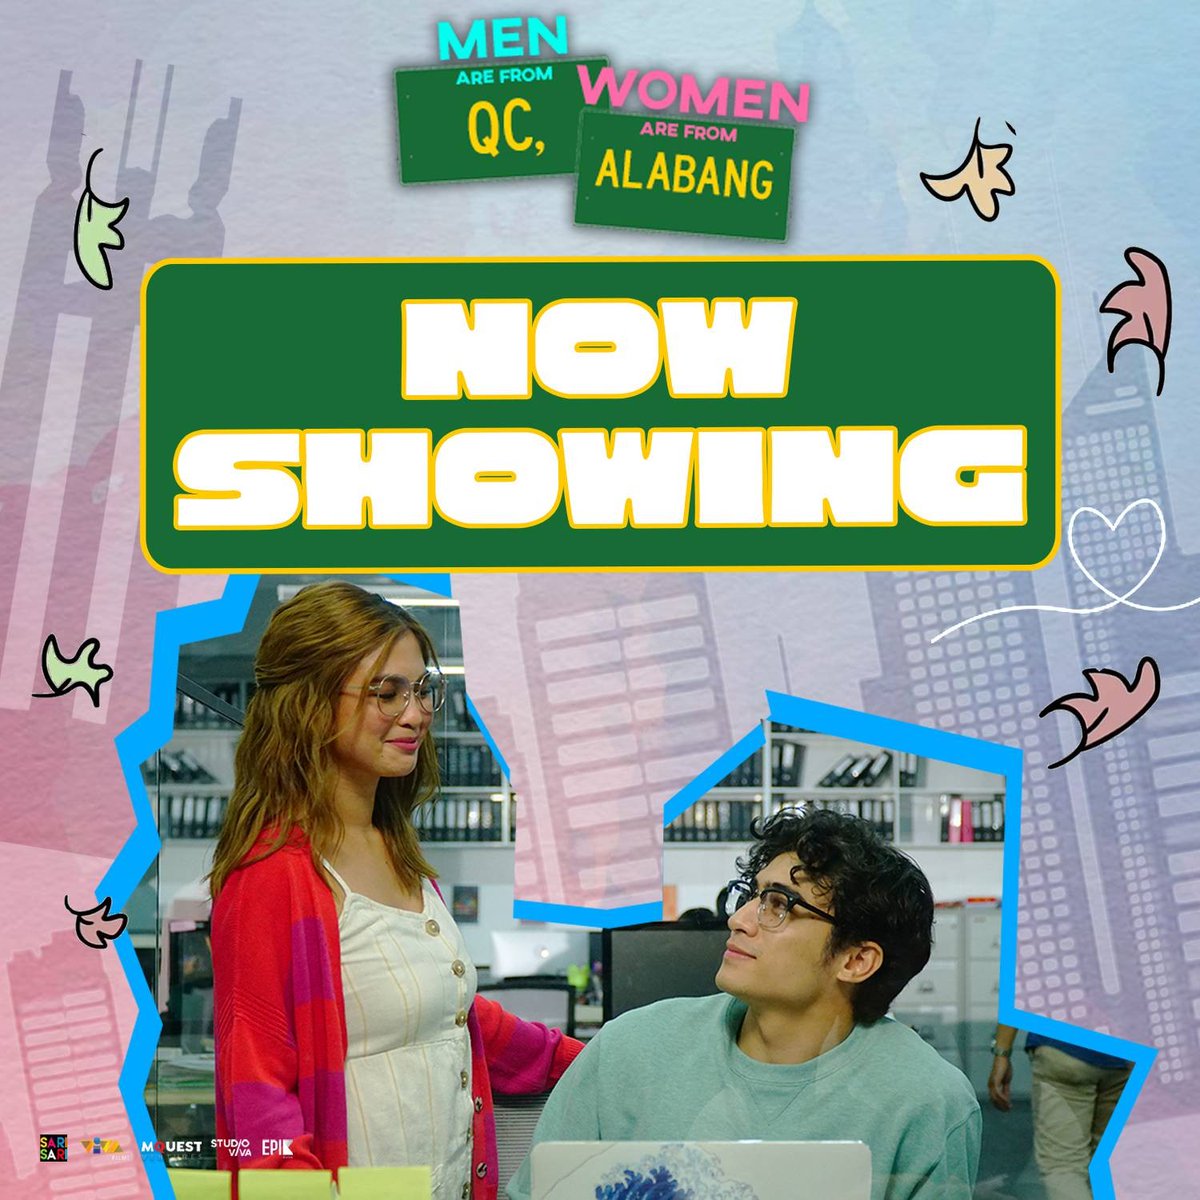 EXPERIENCE THE KIND OF LOVE NA G MAG-KOMYUT FOR YOU! 'Men Are From QC, Women Are From Alabang' NOW SHOWING IN CINEMAS NATIONWIDE! Starring #HeavenPeralejo and #MarcoGallo Directed by Gino M. Santos. Based on the best-selling book by Stanley Chi! #MarVen #QCAlabang